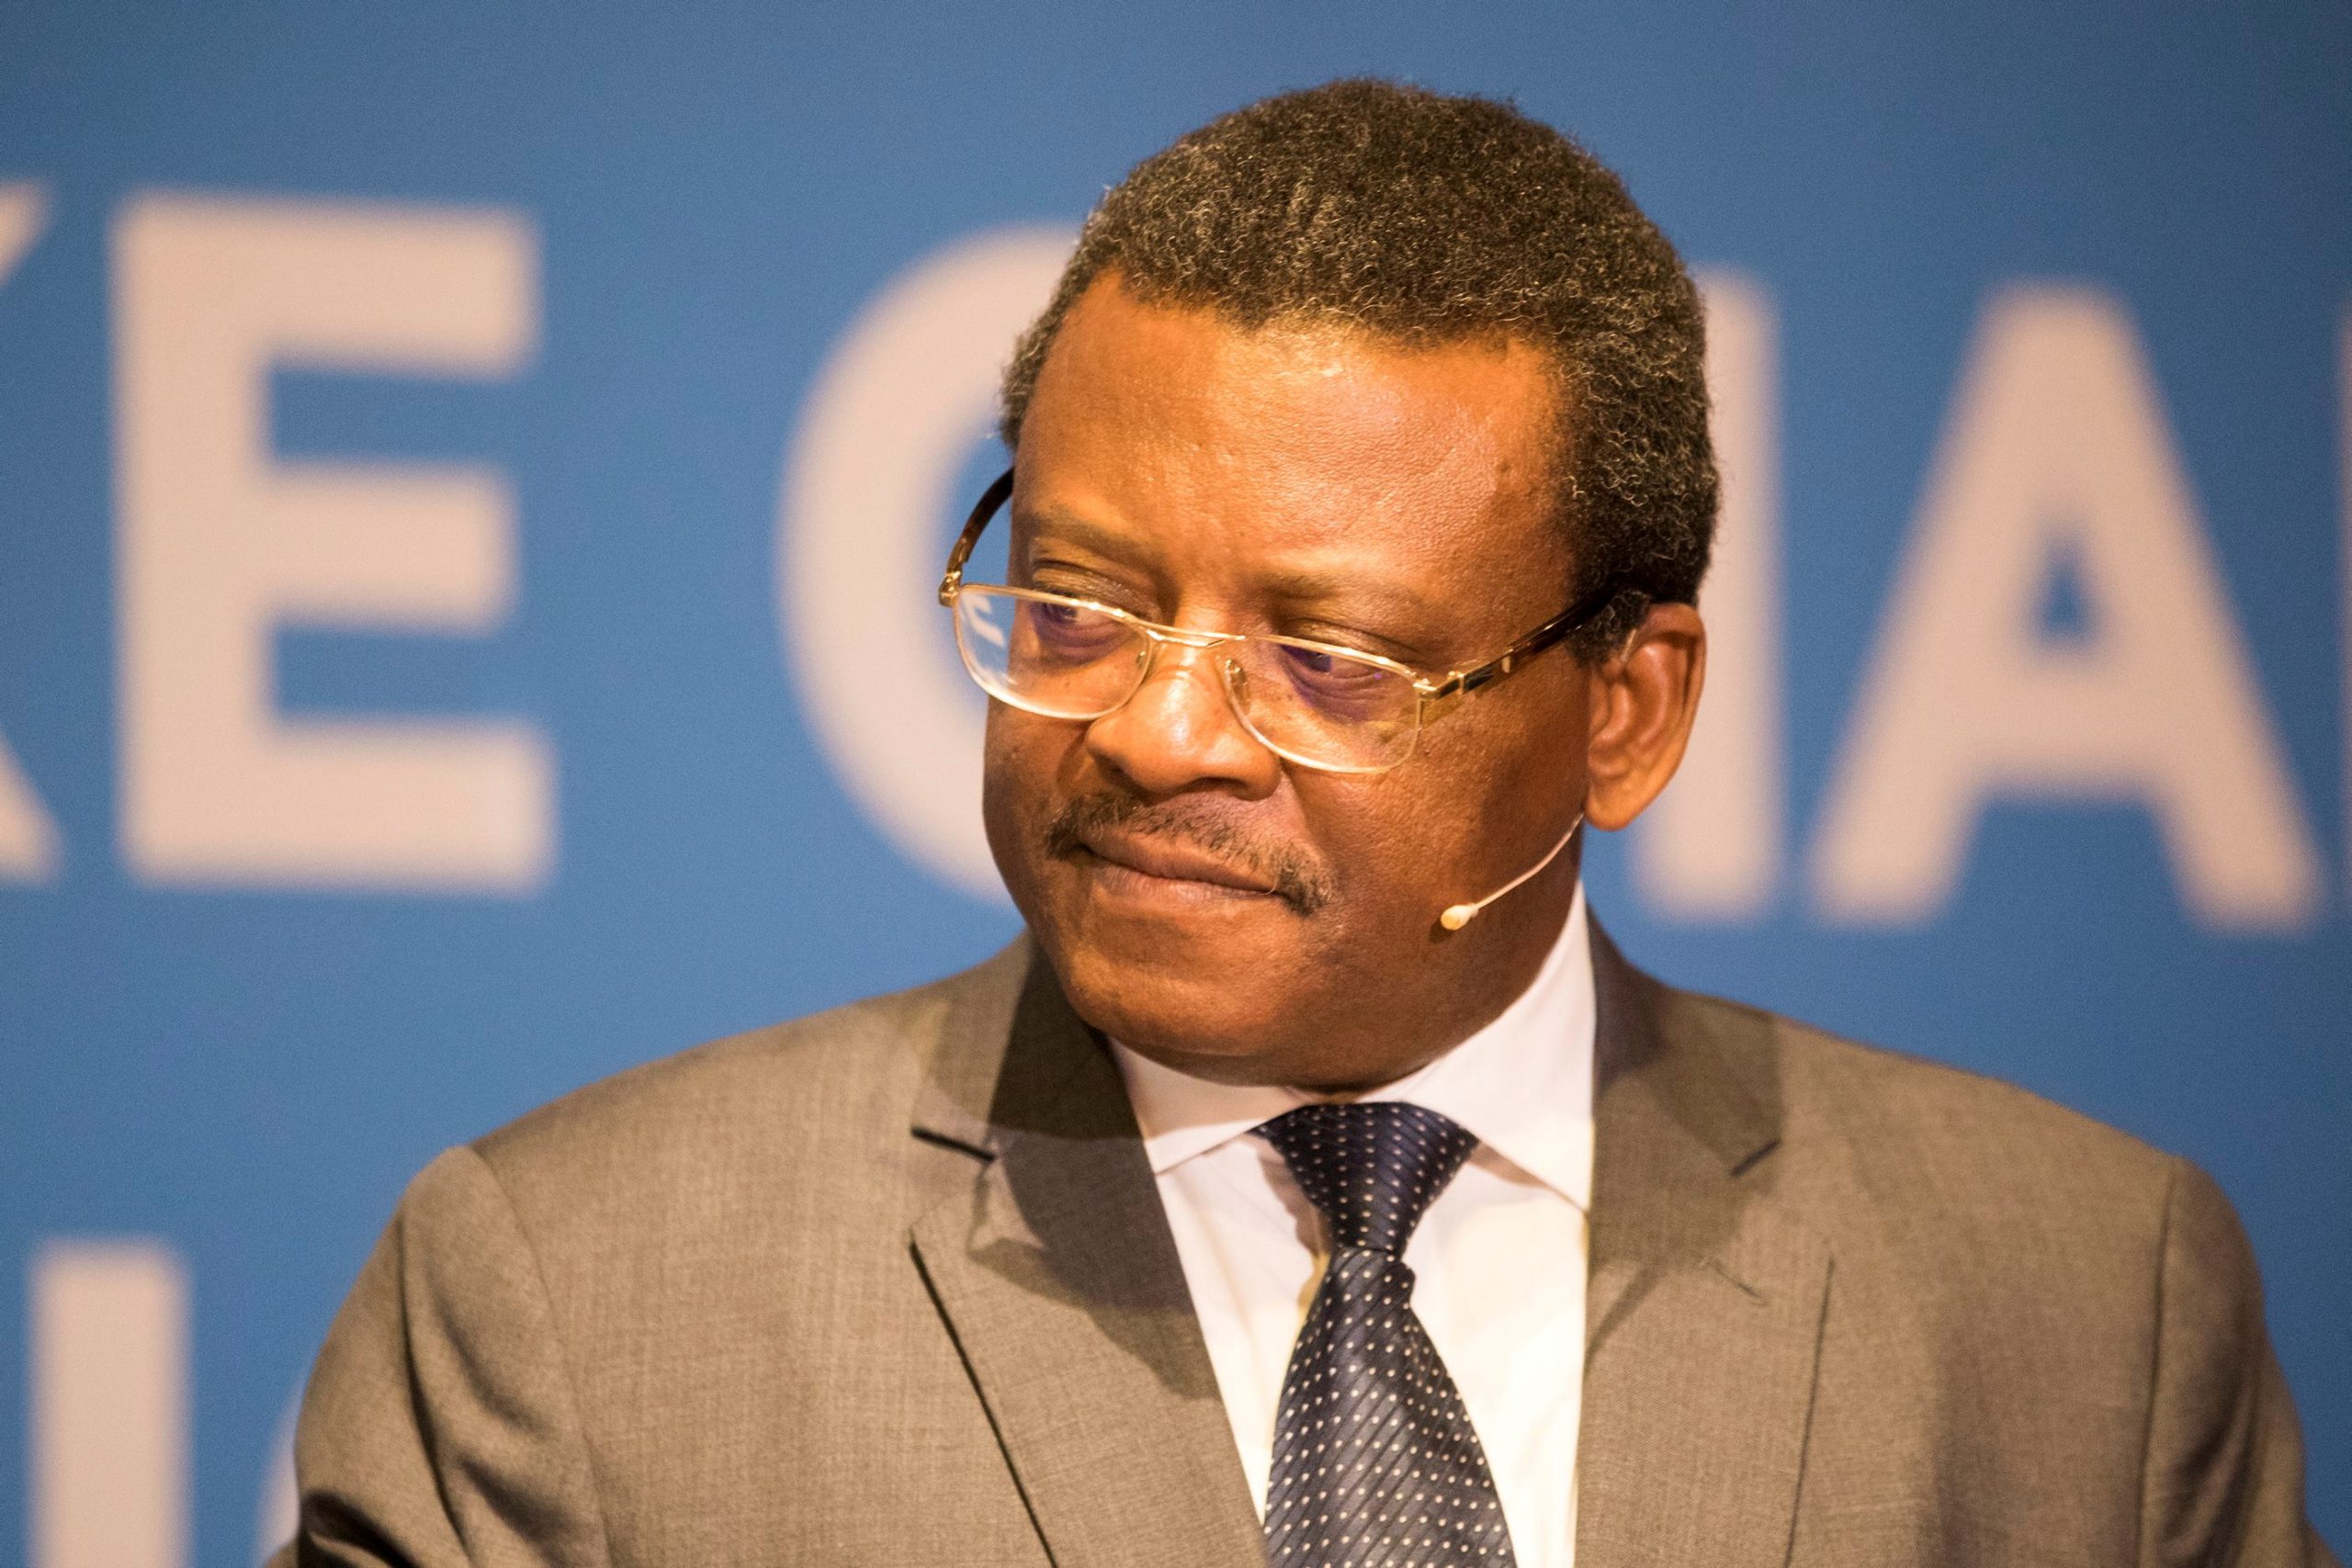 Cameroonian PM urges citizens to embrace peace in restive Anglophone region